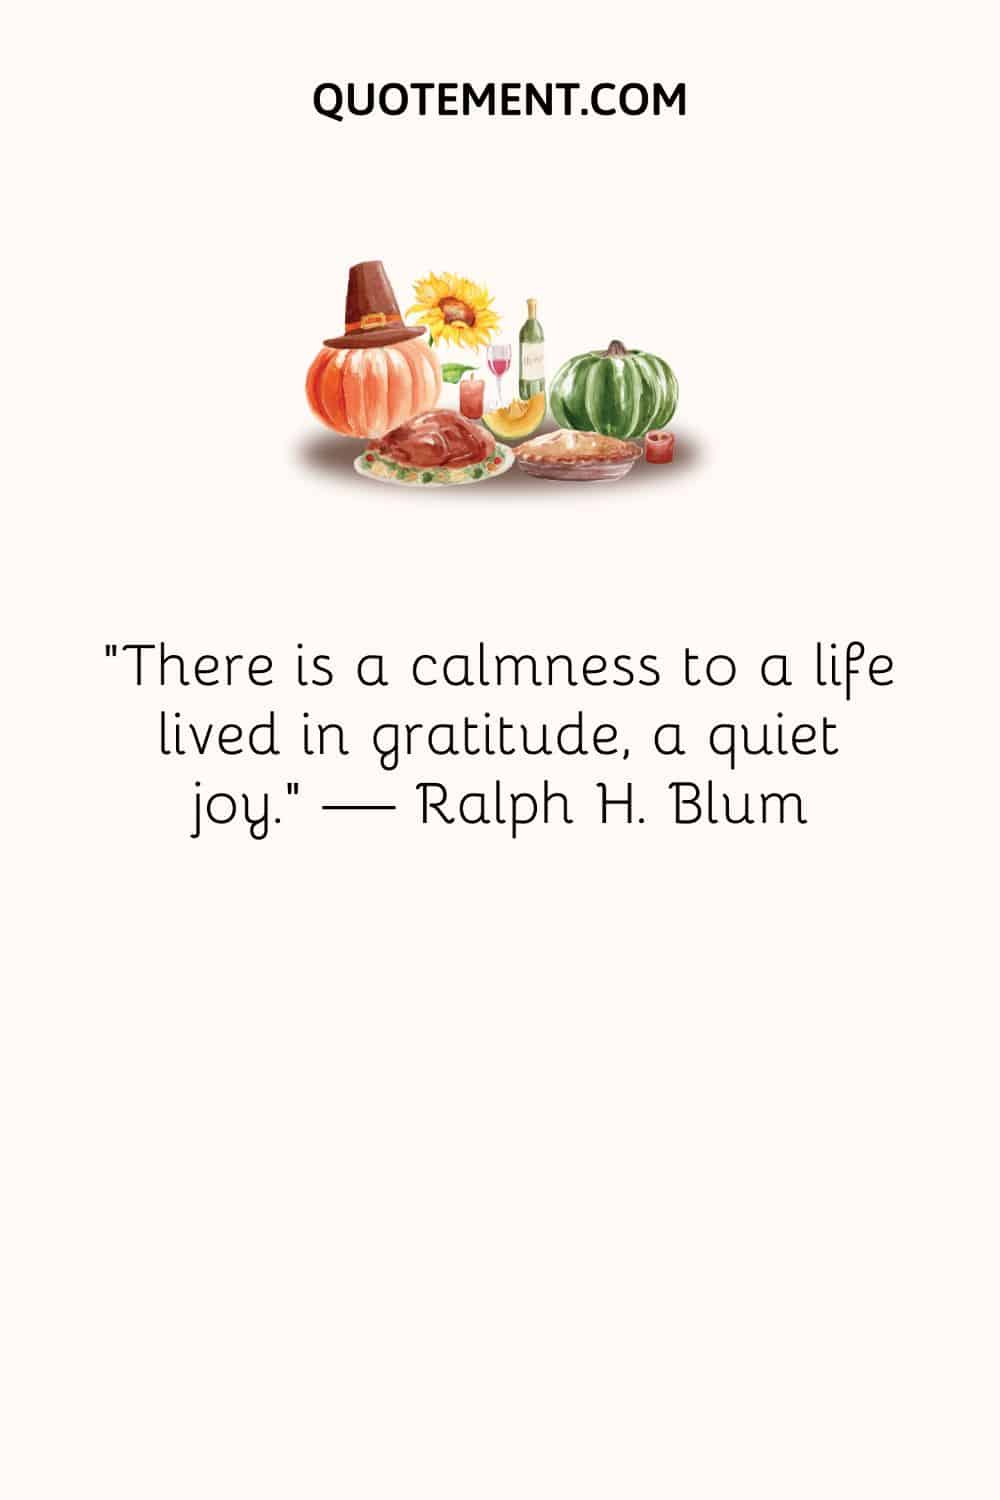 There is a calmness to a life lived in gratitude, a quiet joy